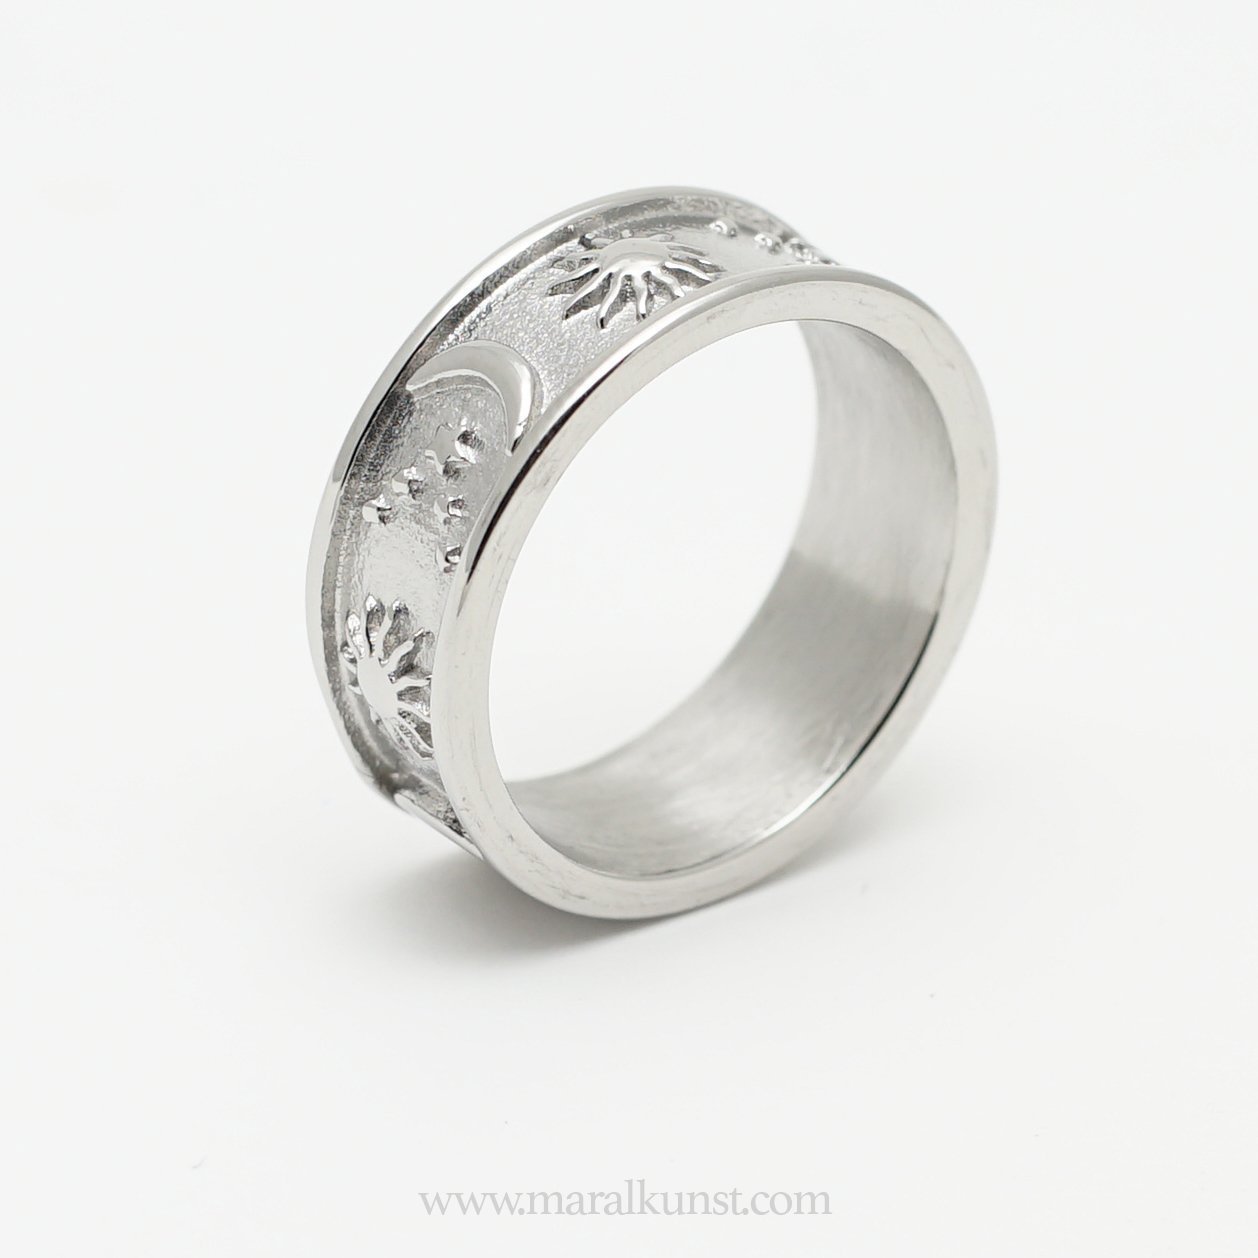 Moon And Sun Band Ring - Maral Kunst Jewelry